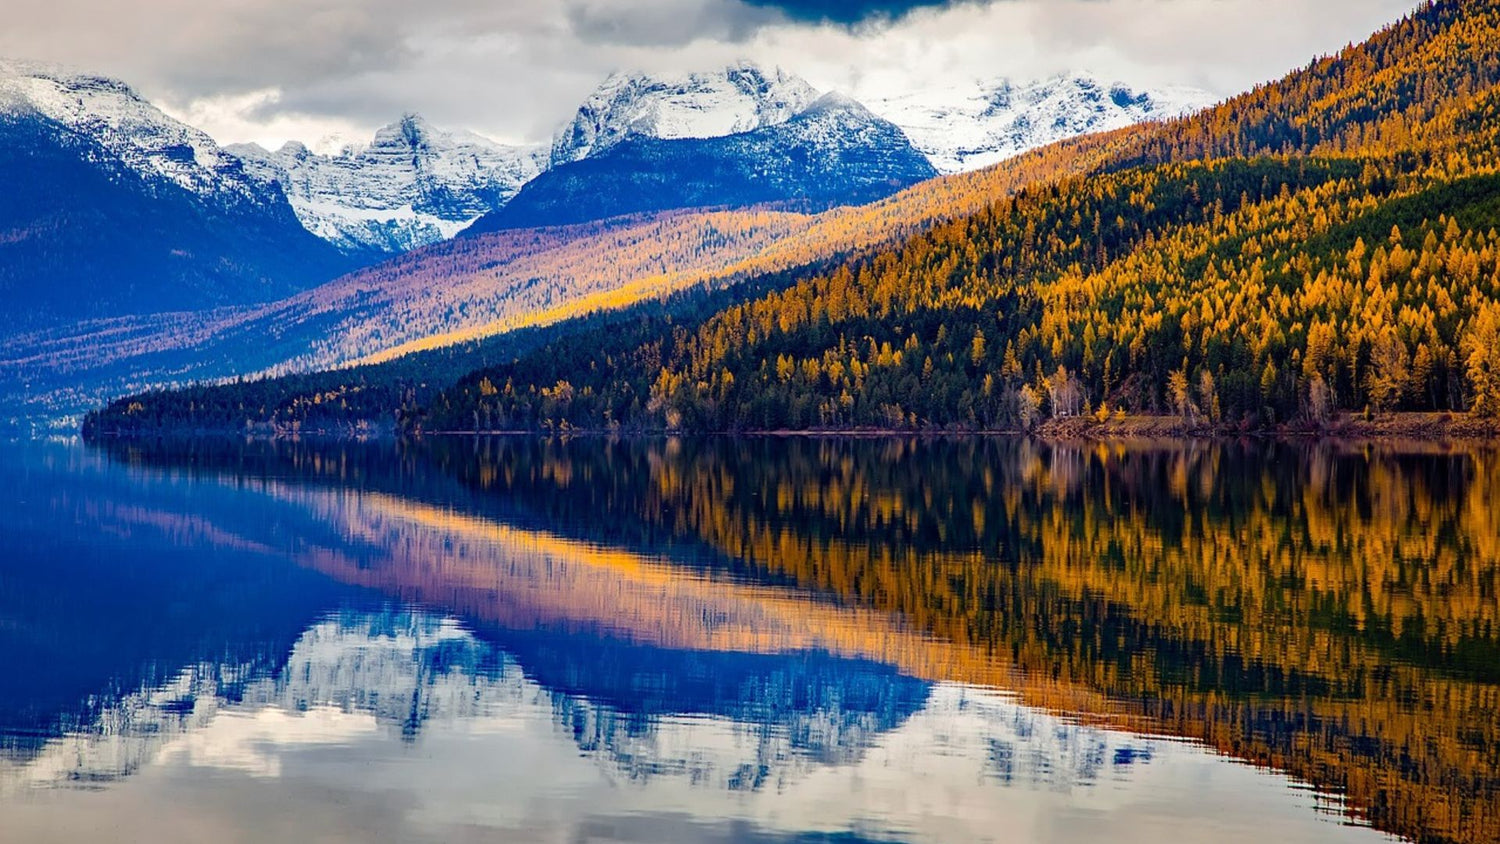 Lake McDonald, Glacier National Park, Montana. Mountain reflection on the water. - History By Mail